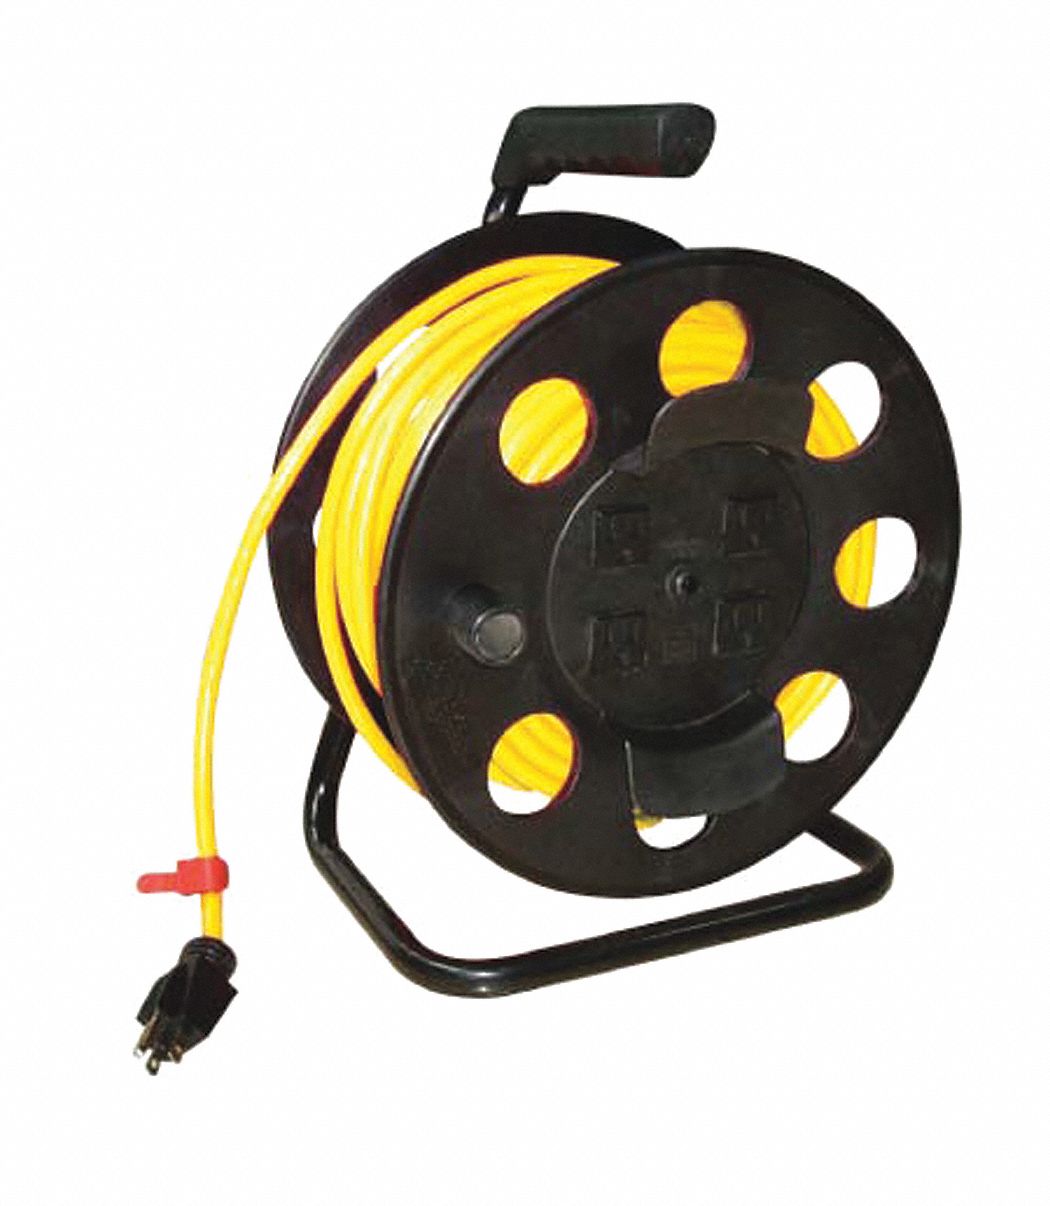 OUTLET CORD + REEL 12/3 100 FT